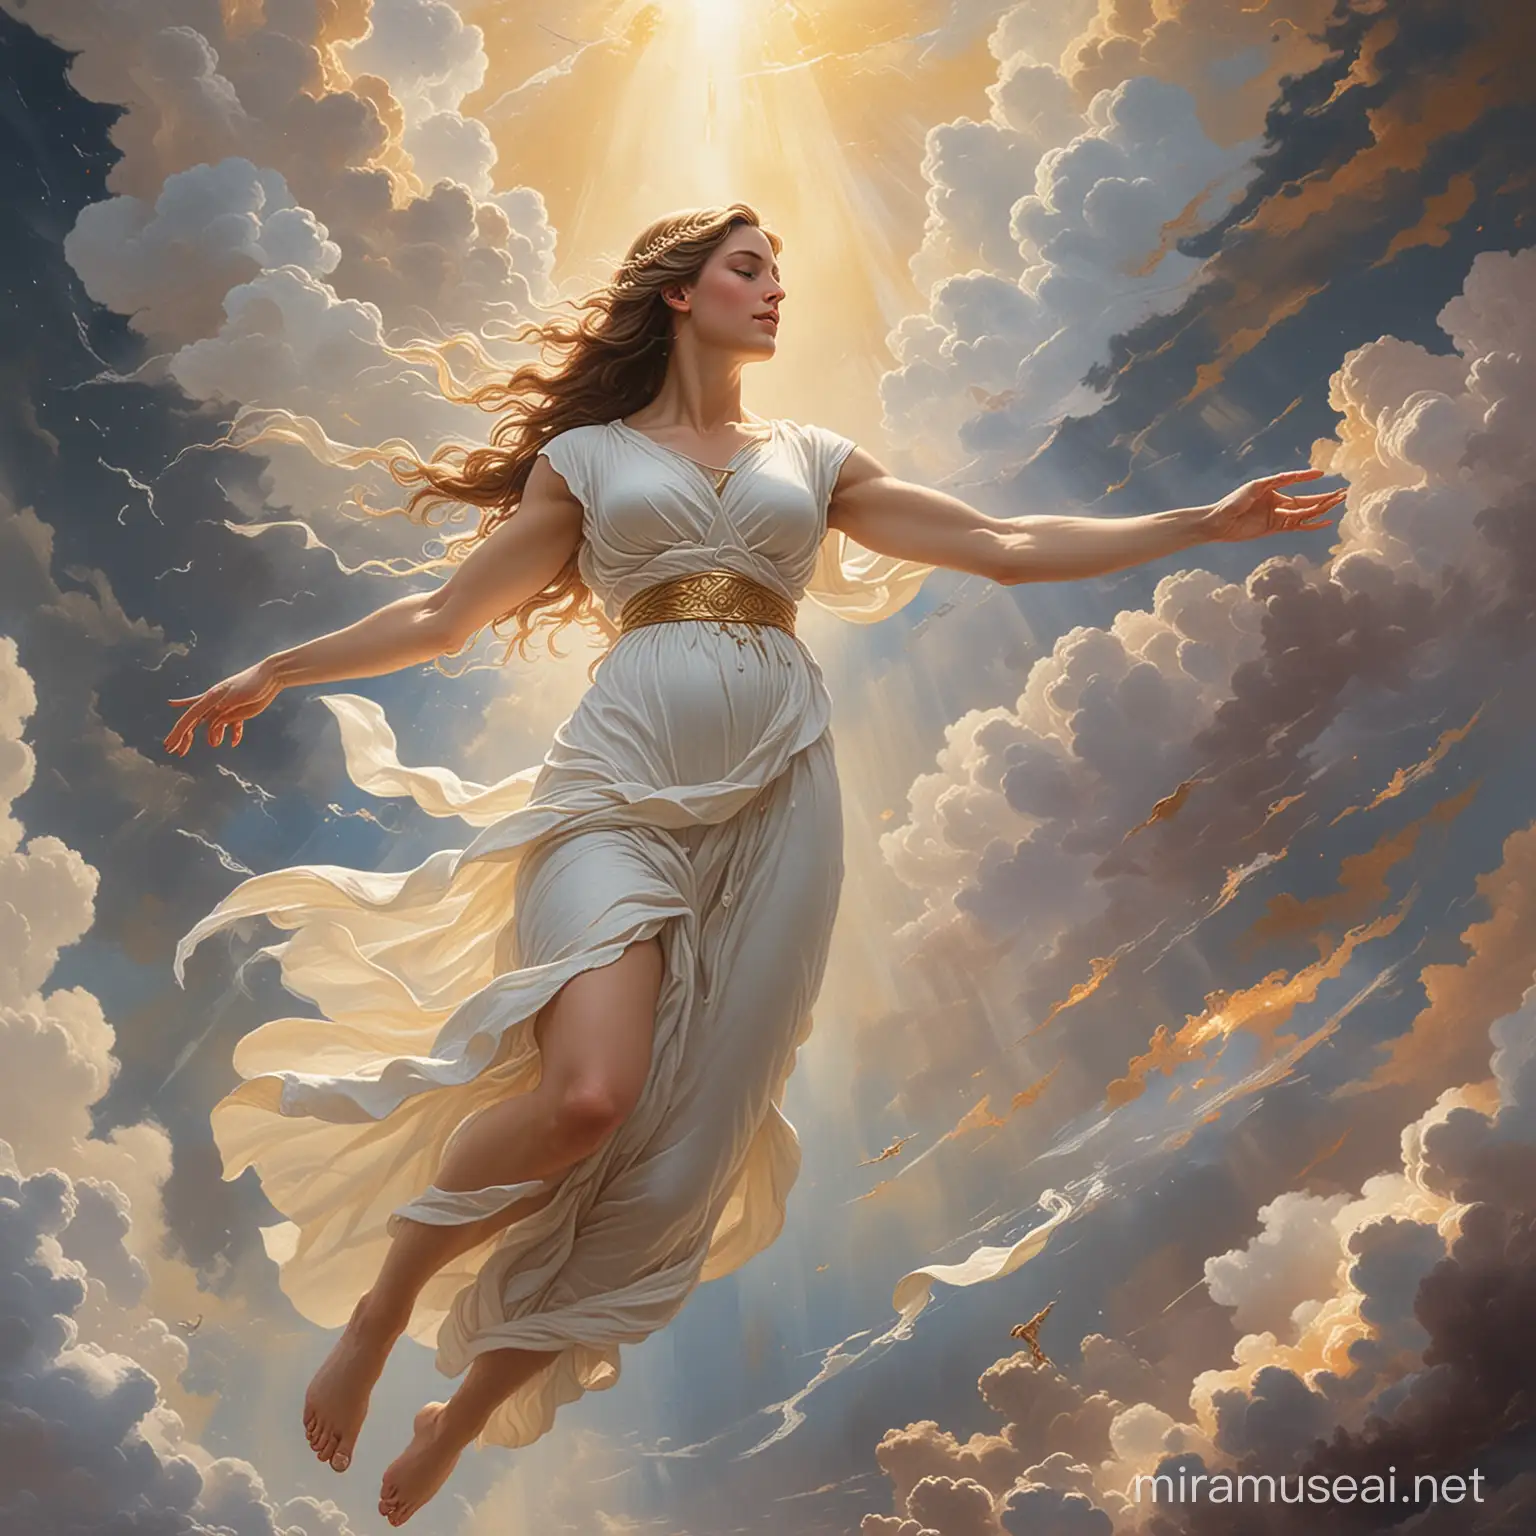 Paint a picture, an oil painting, a goddess descending from the sky and grabbing the arm of a woman in white, an oil painting of the West, like the creation of Adam